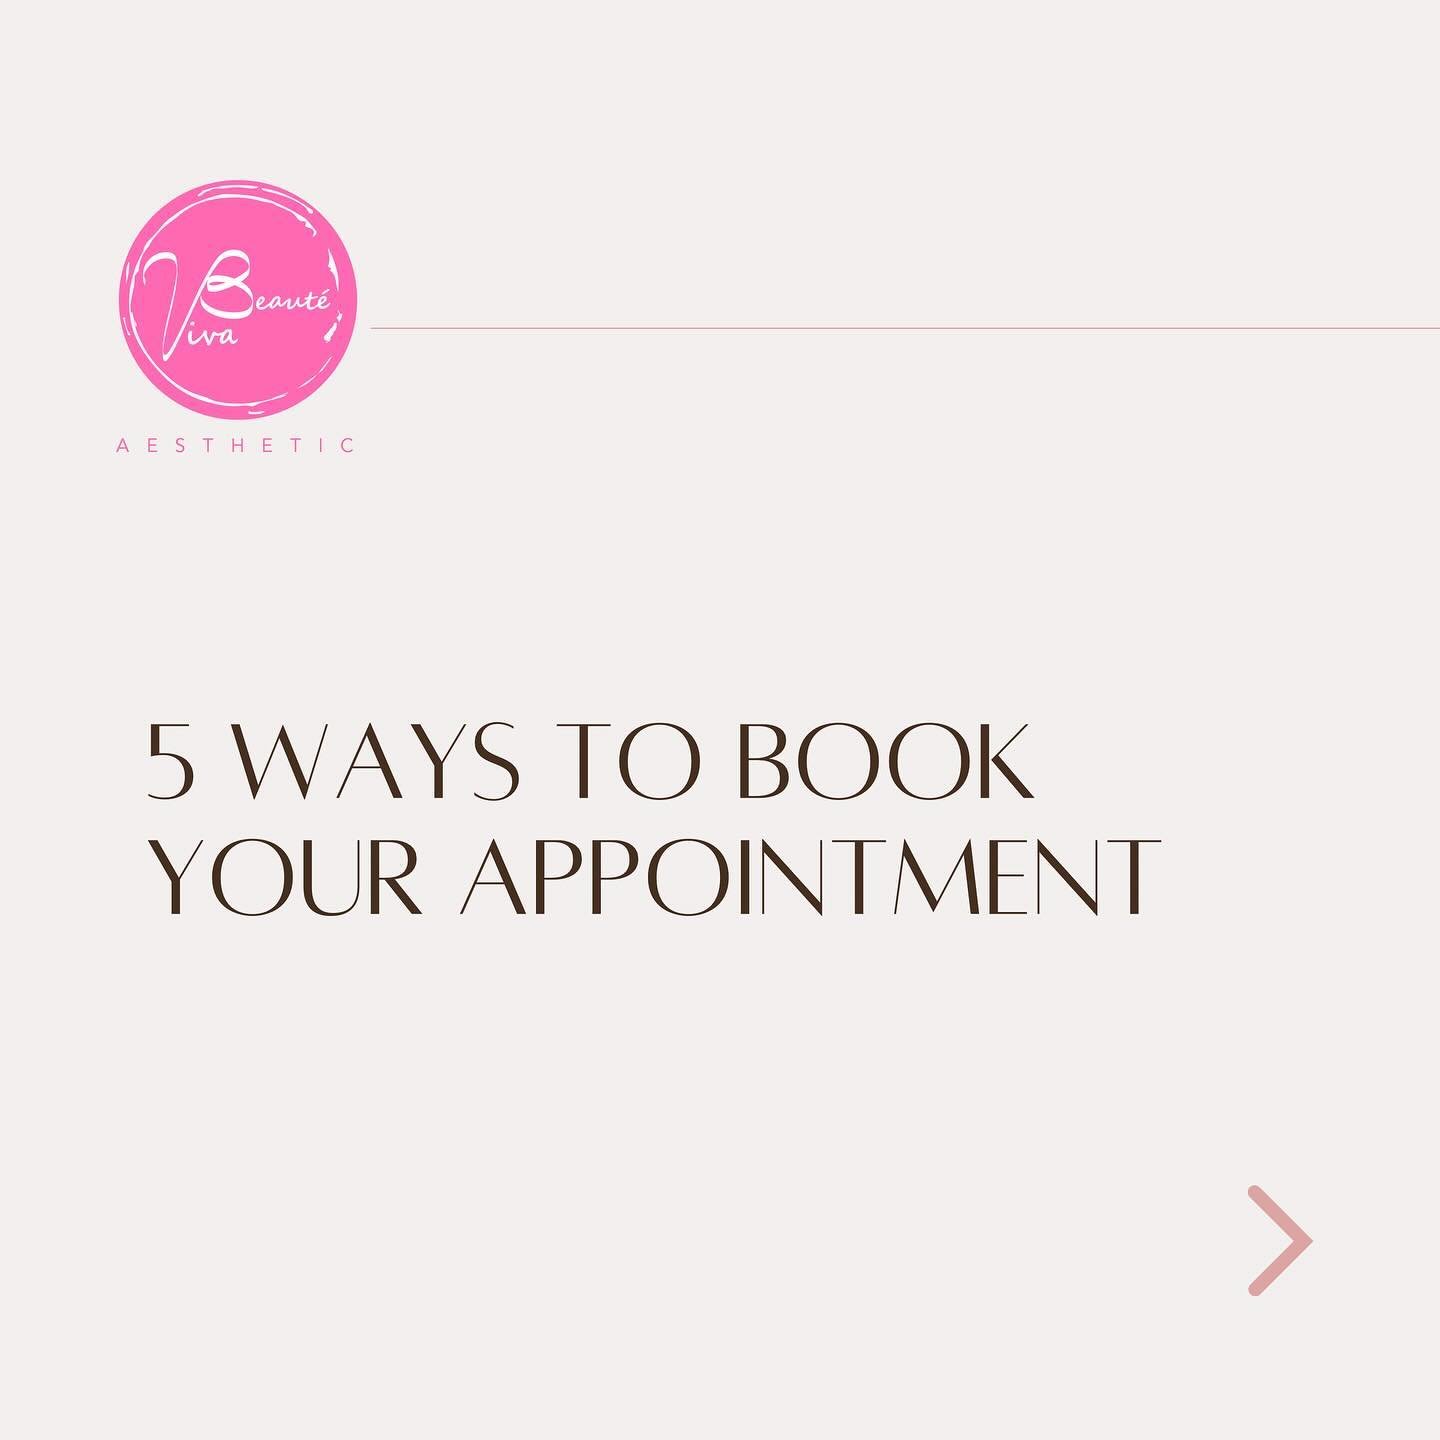 🗓️Booking an appointment at Viva Beaut&eacute; Aesthetics is easy! Here are 5 convenient ways to secure your spot, designed to suit your preference: 

1. 𝗩𝗶𝘀𝗶𝘁 𝗼𝘂𝗿 𝘄𝗲𝗯𝘀𝗶𝘁𝗲: www.vivabeaute.nz
2. 𝗖𝗹𝗶𝗰𝗸 𝘁𝗵𝗲 &lsquo;𝗕𝗢𝗢𝗞 𝗡𝗢𝗪